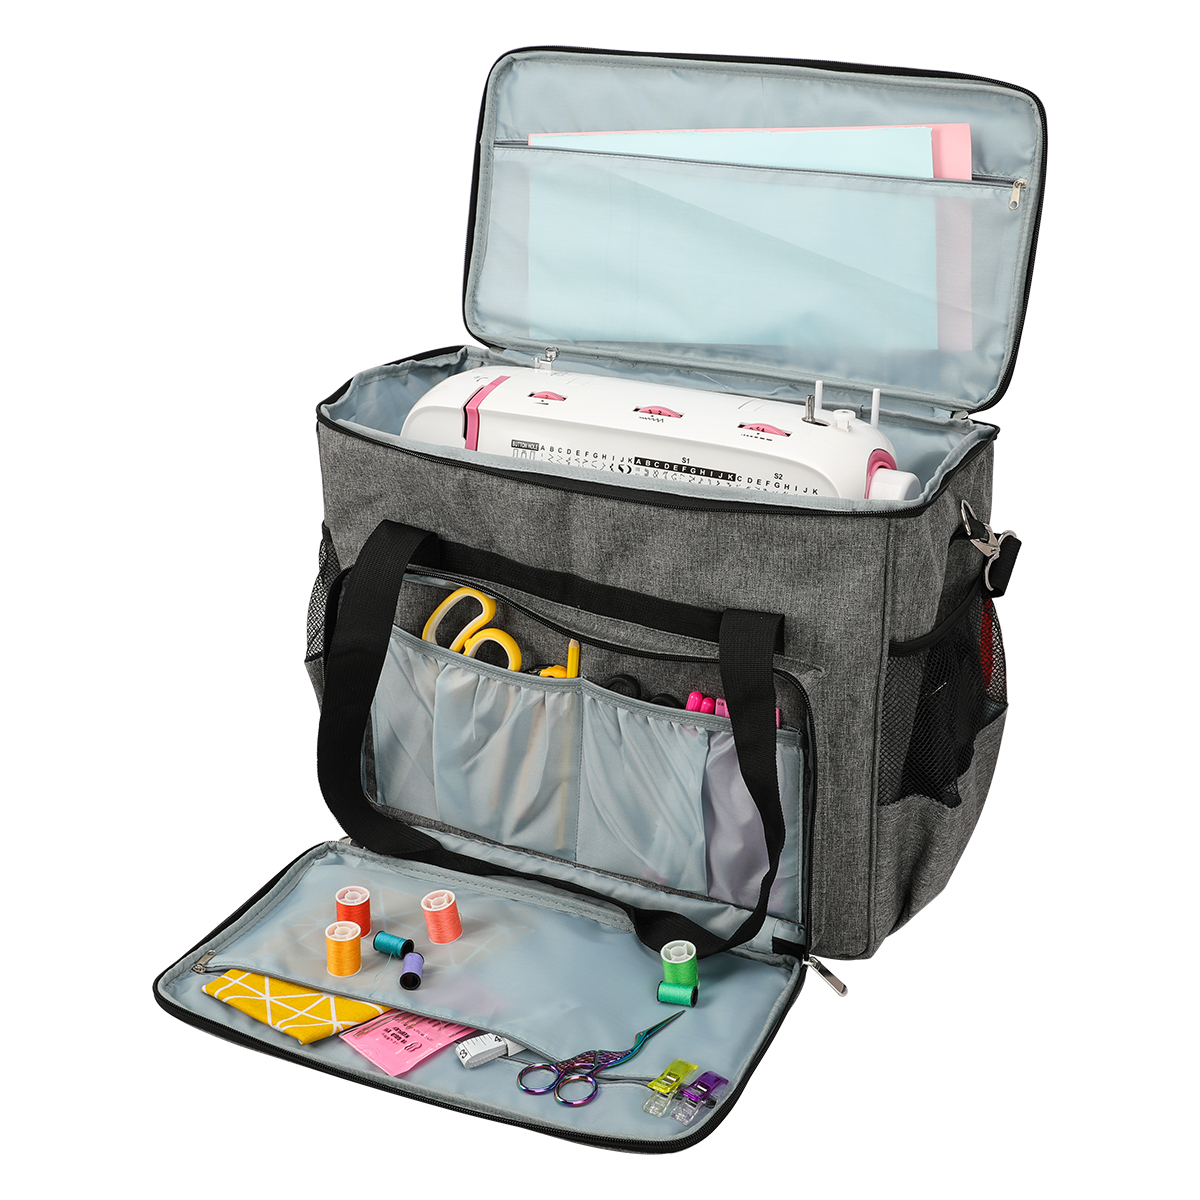 Large Capacity Sewing Machine Storage Bags Tote Multi-functional Portable Travel Home Organizer Sewing Machine Accessories